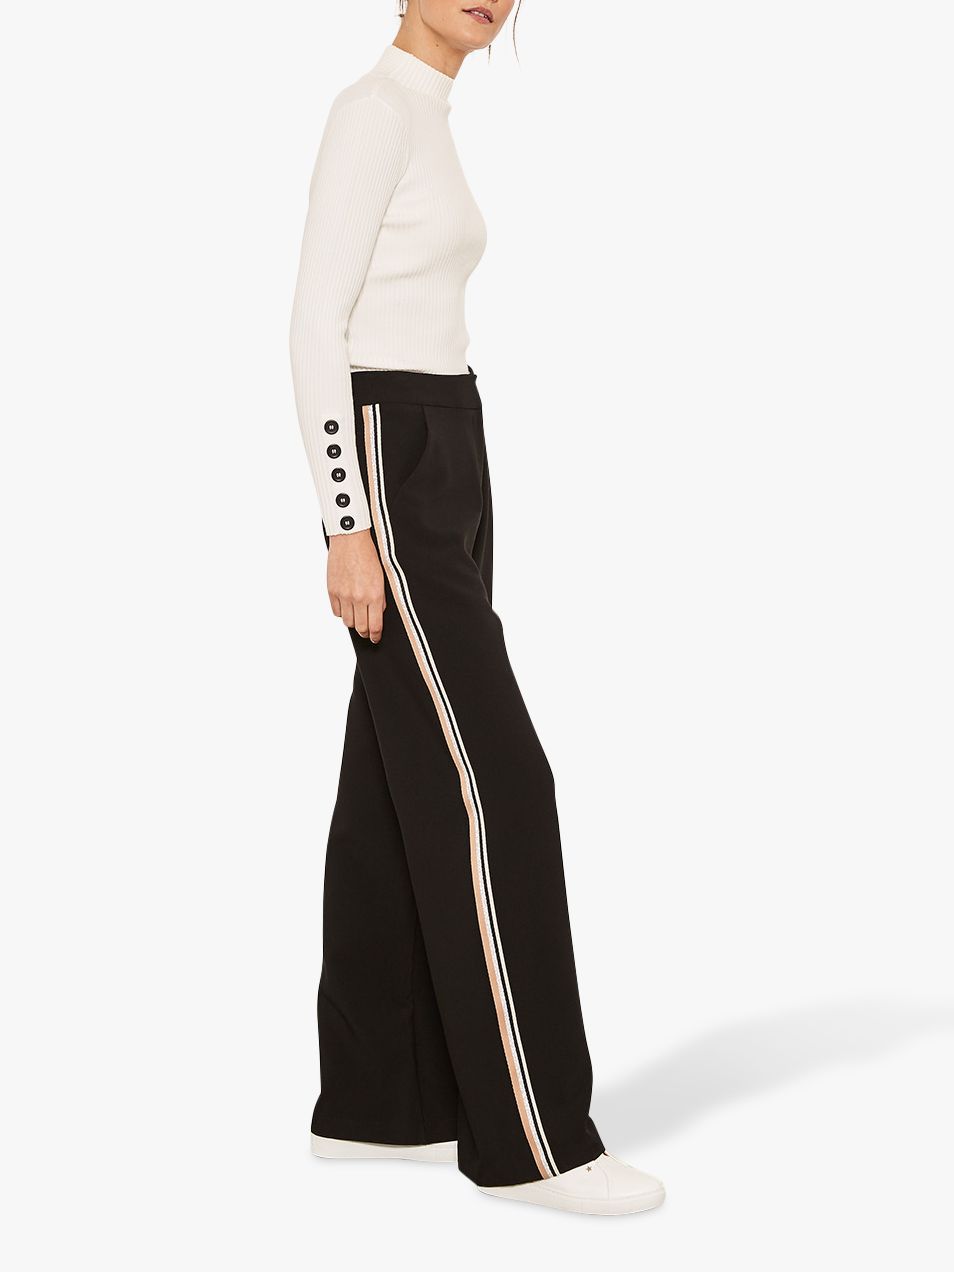 black with white stripe trousers